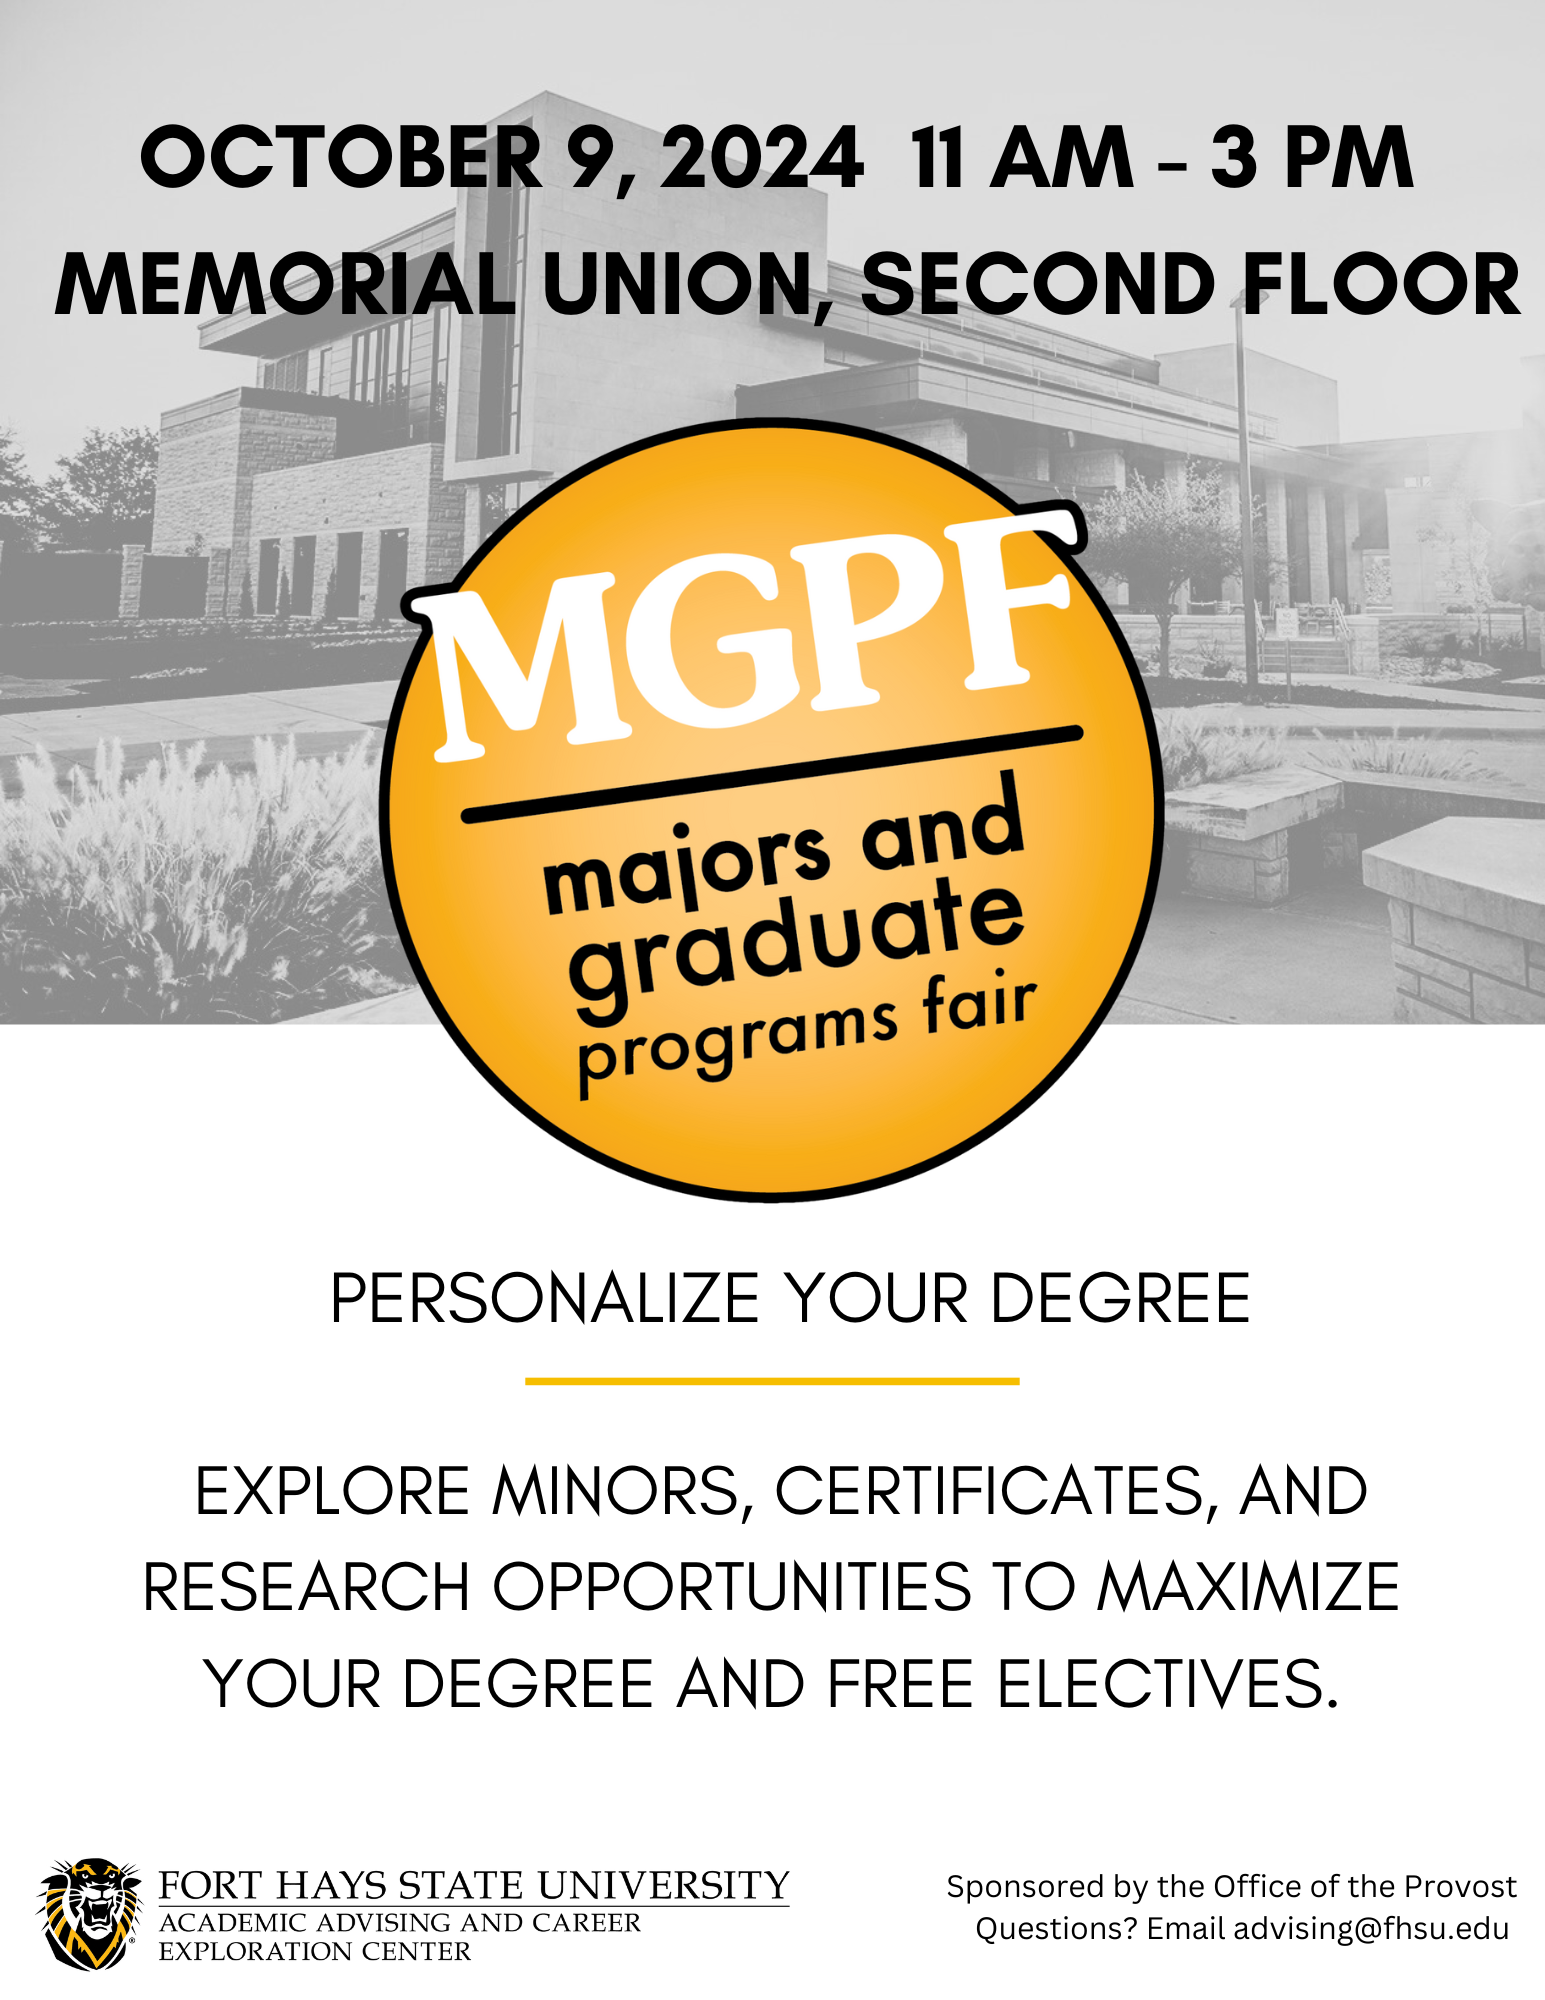 mgpf_minors_flyer.png